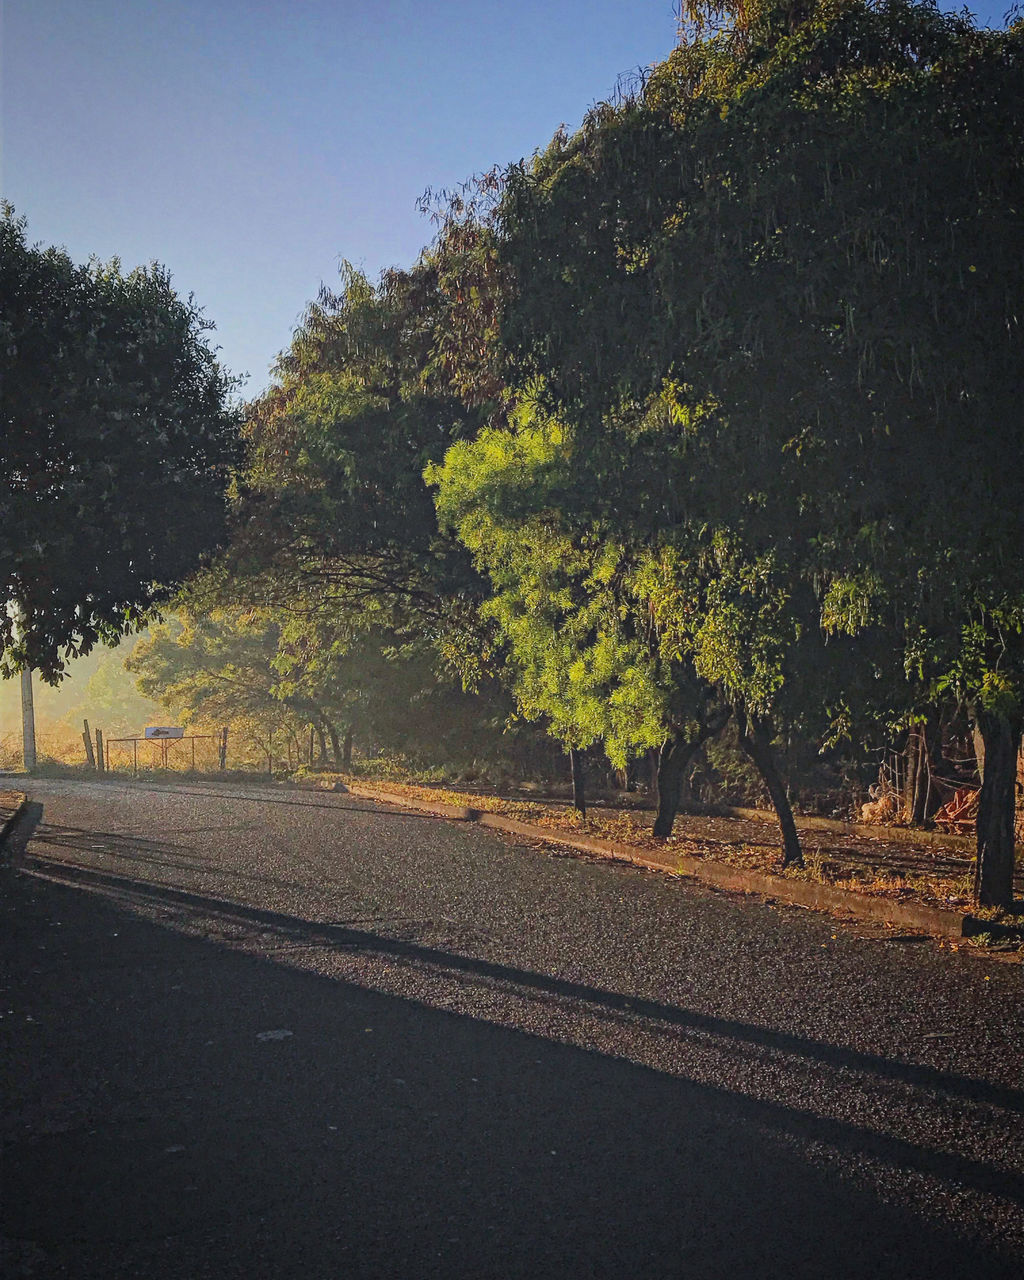 tree, plant, morning, road, nature, transportation, leaf, autumn, sky, sunlight, no people, yellow, street, beauty in nature, rural area, outdoors, city, growth, landscape, dusk, tranquility, asphalt, day, environment, light, scenics - nature, clear sky, land, travel, horizon